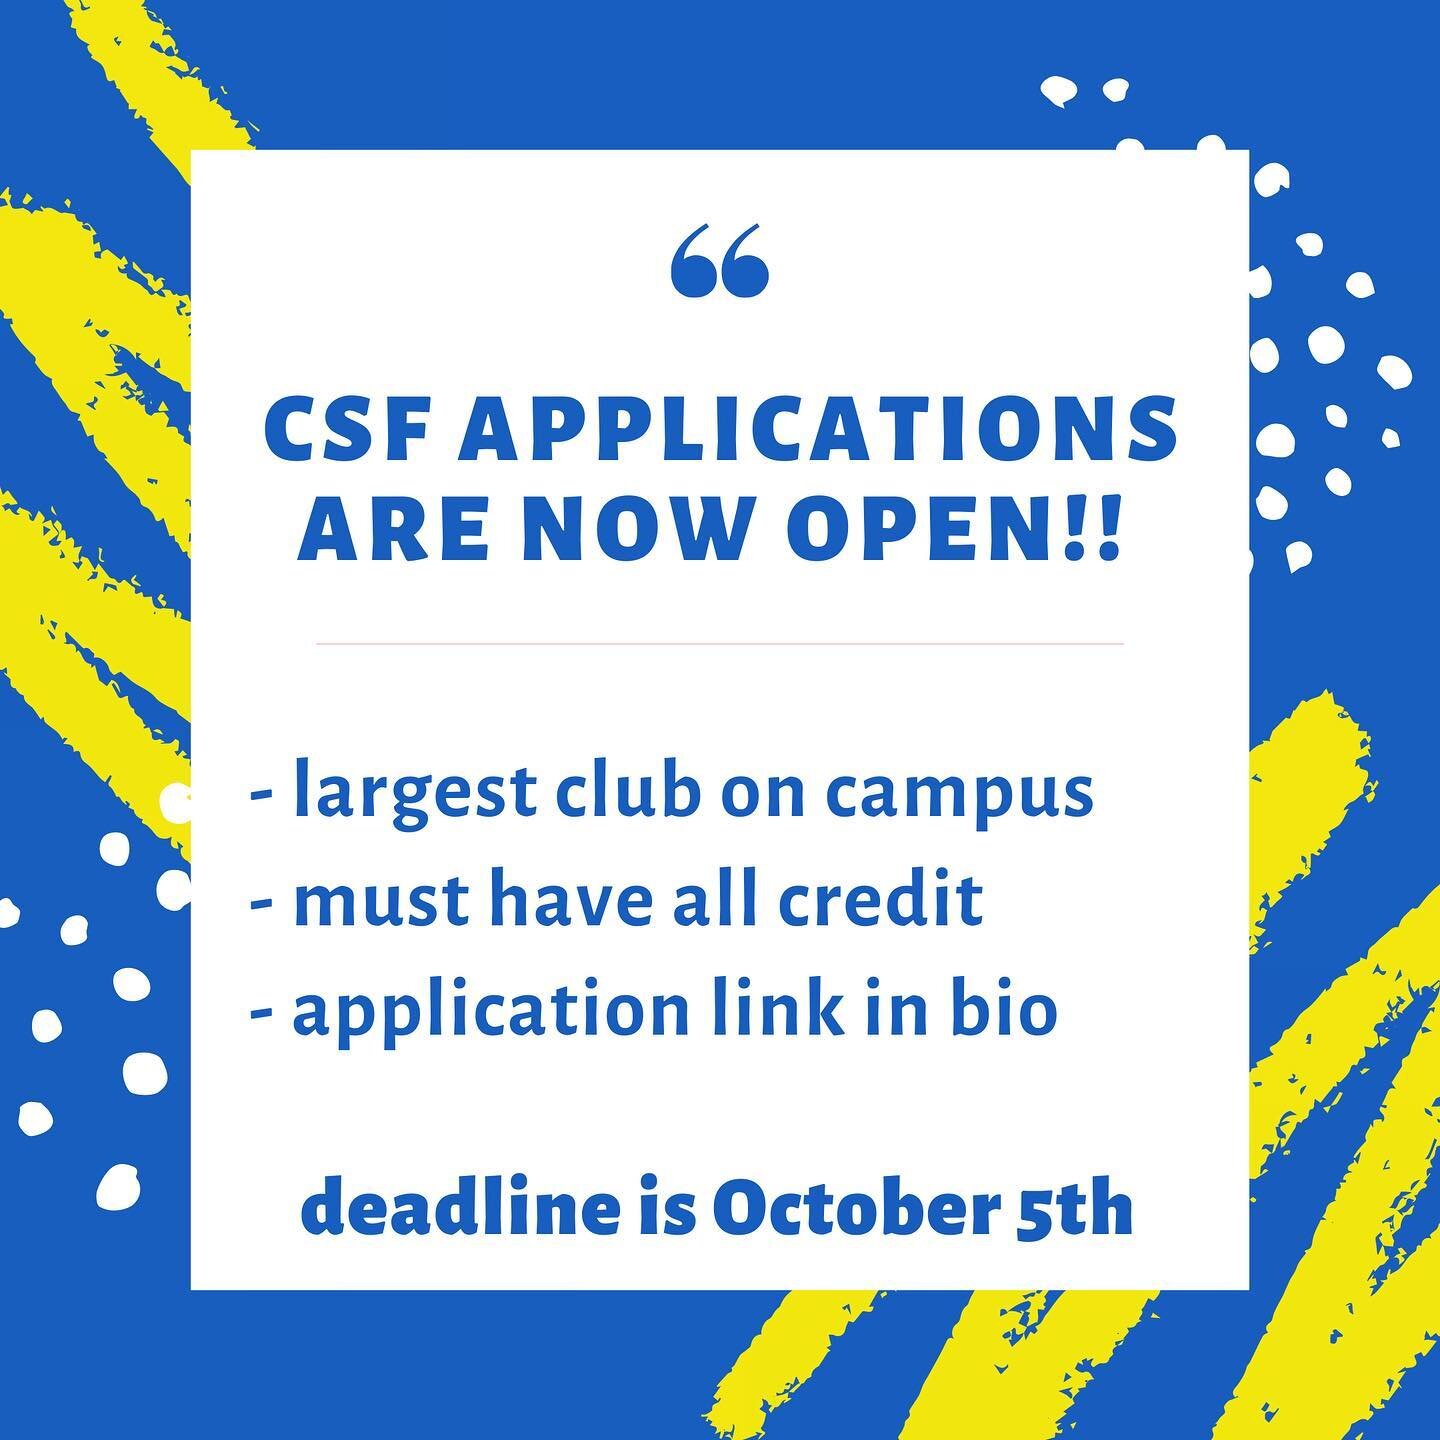 CSF 20-21 year applications are now open!! Join Dublin CSF for service and volunteering opportunities💙join our google classroom with code: 6wvo6g2 (use your personal email, not your school email!)